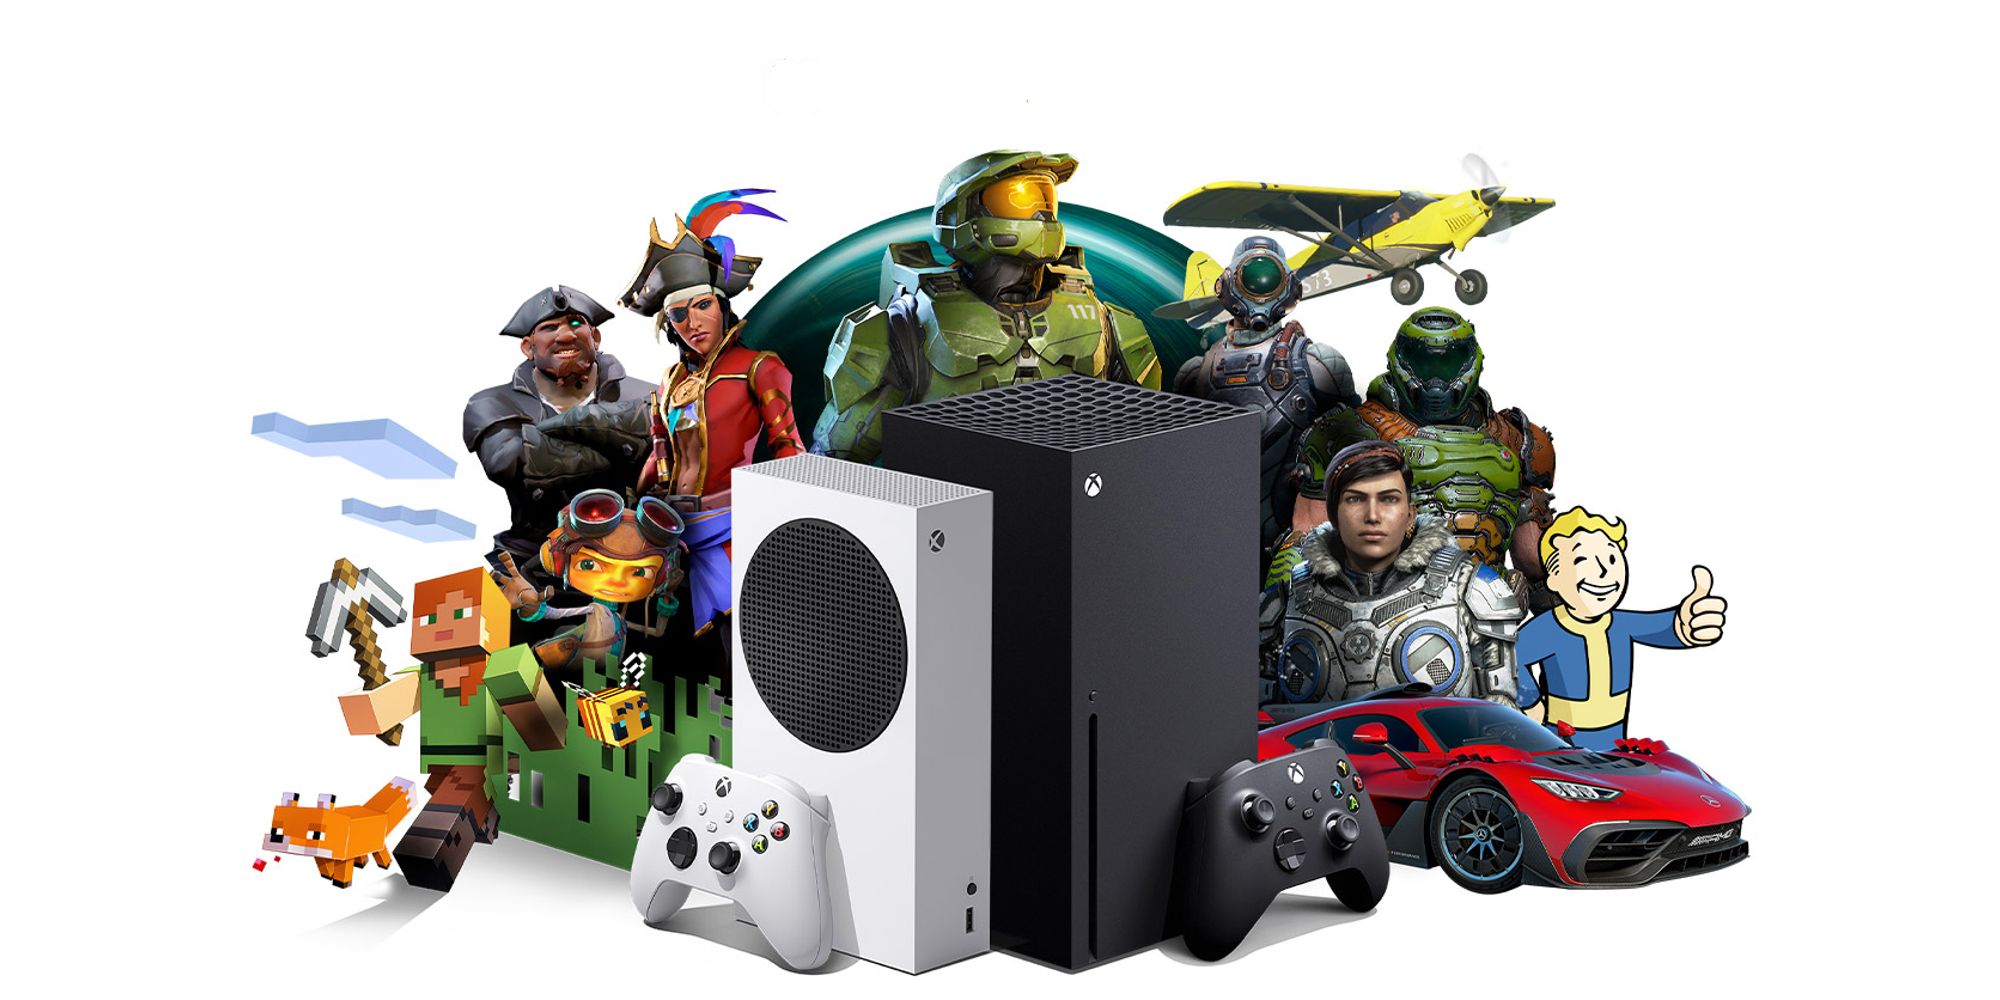 Xbox Game Pass Official Art With Xbox Series Consoles And Xbox Mascots